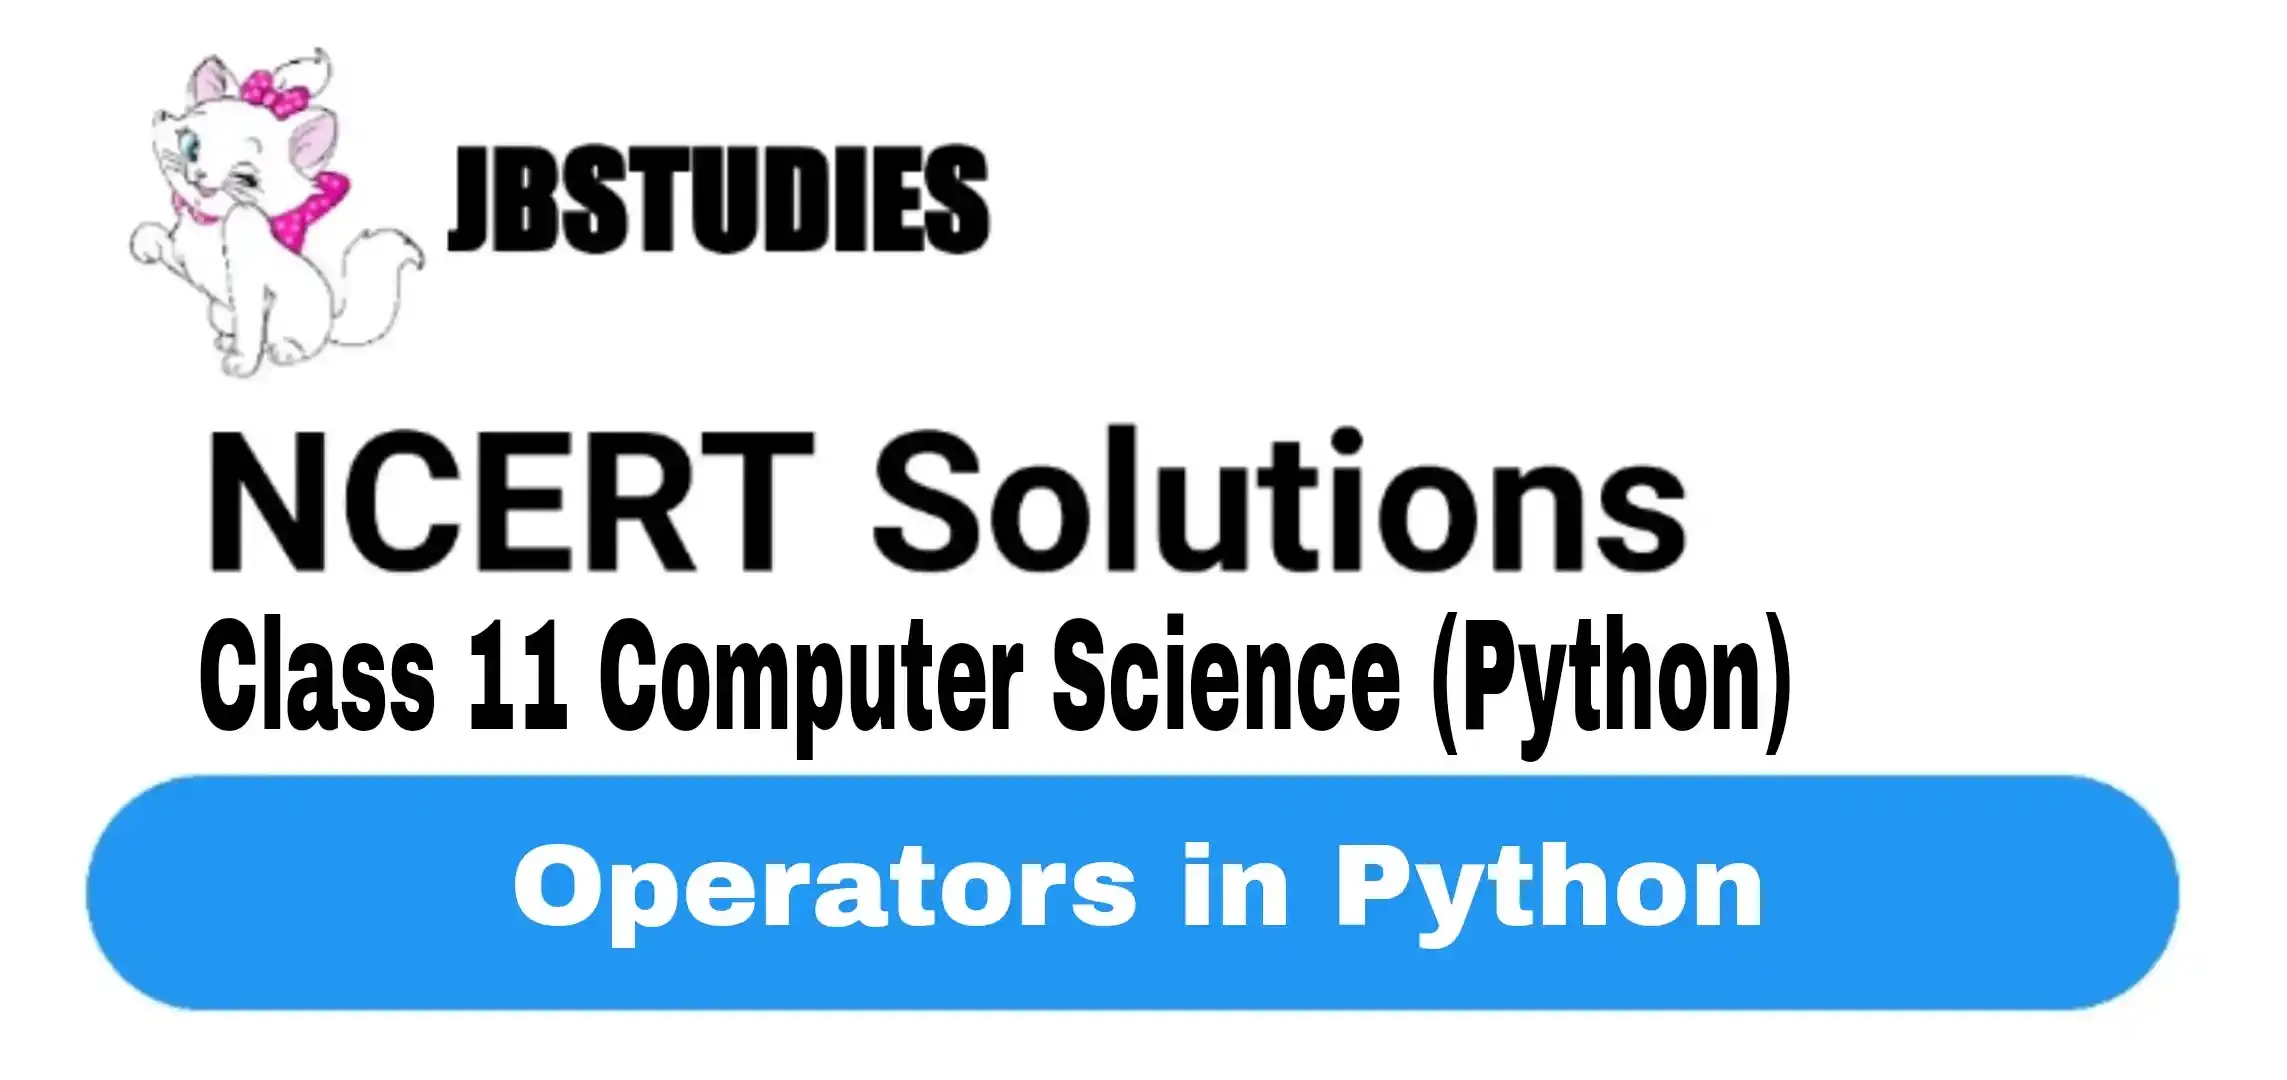 Solutions Class 11 Computer Science (Python) Chapter-9 (Operators in Python)